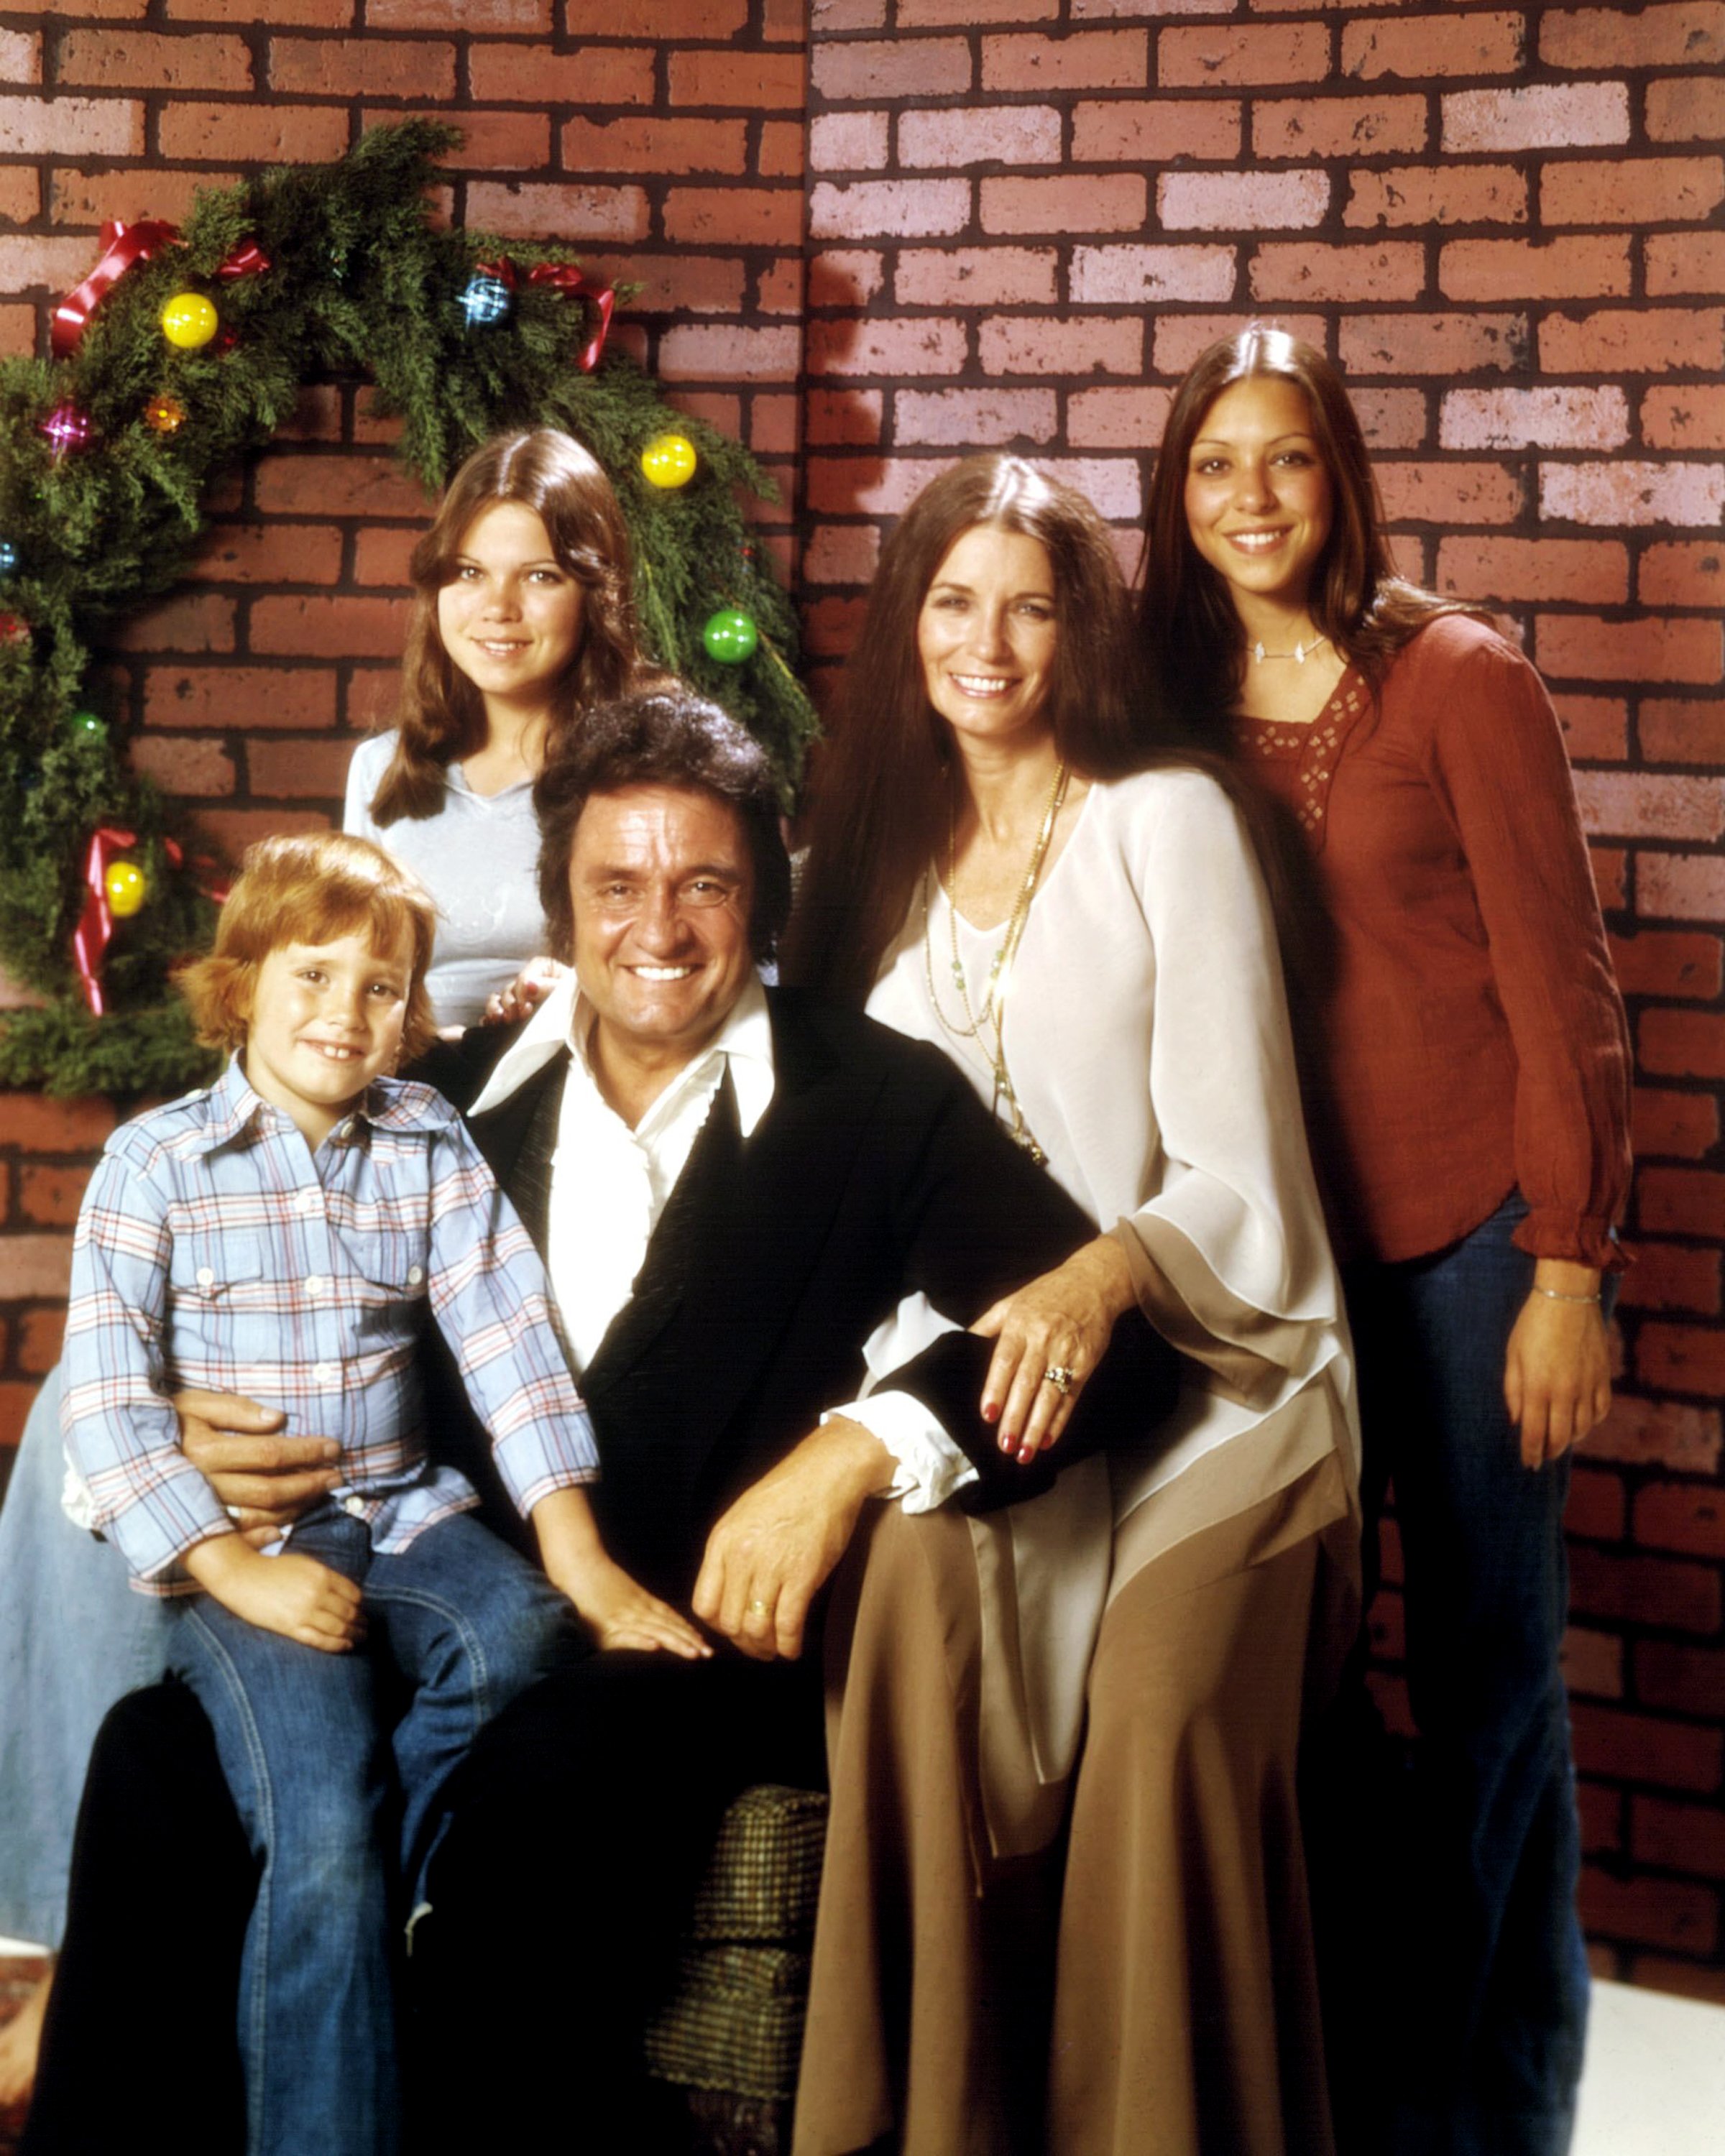 ohnny Cash (1932 - 2003) with his wife June Carter Cash (1929 - 2003) and three of their children, circa 1976. | Photo: Getty Images